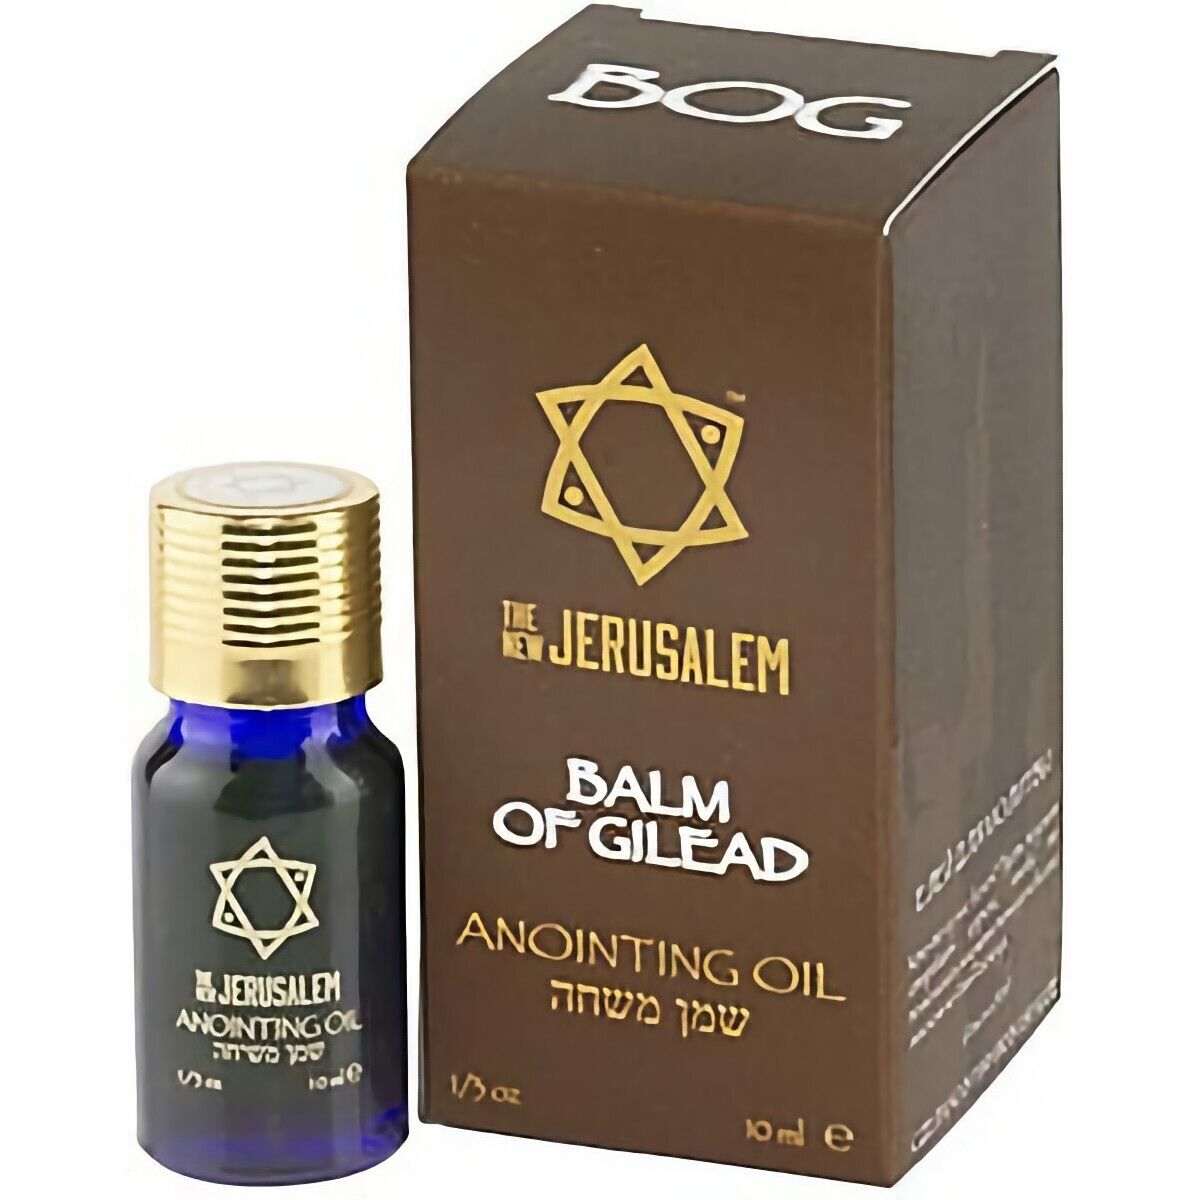 Balm of Gilead Anointing Oil Holy Spiritual the new Jerusalem Handmade with Natural Ingredients and Blessed for Ceremony, Religious Use 0.34 Fl Oz - 10 ml